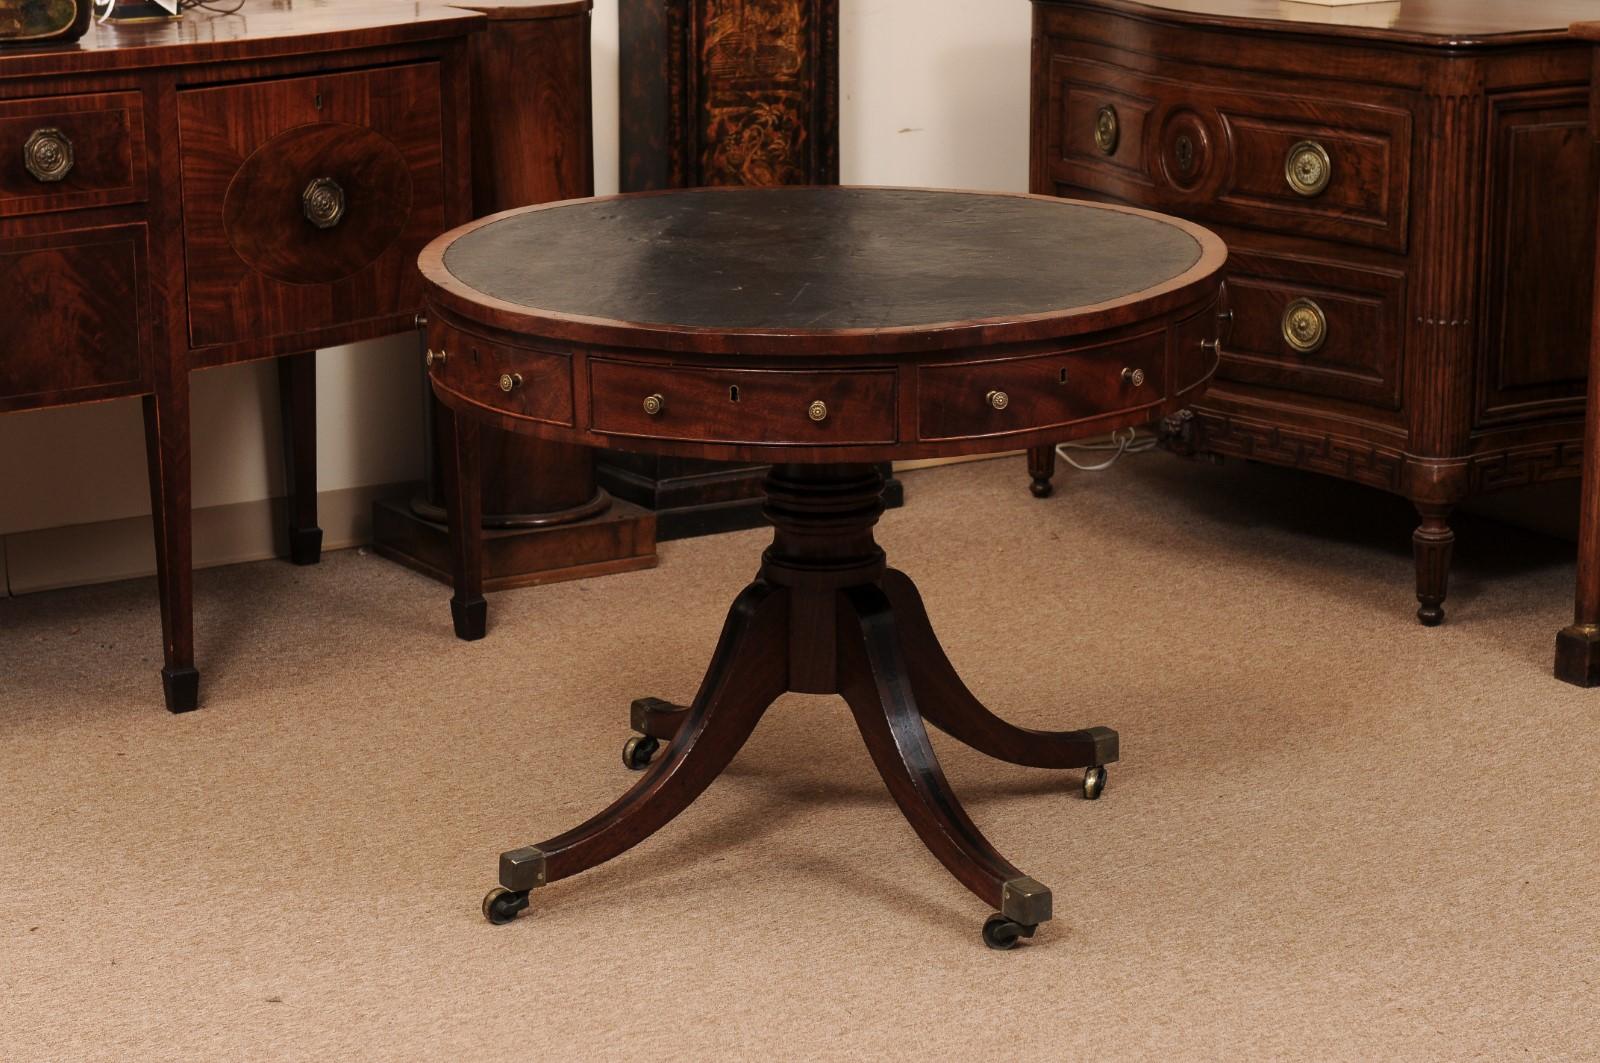 19th Century English Mahogany Drum Table with Black Leather Top In Fair Condition For Sale In Atlanta, GA